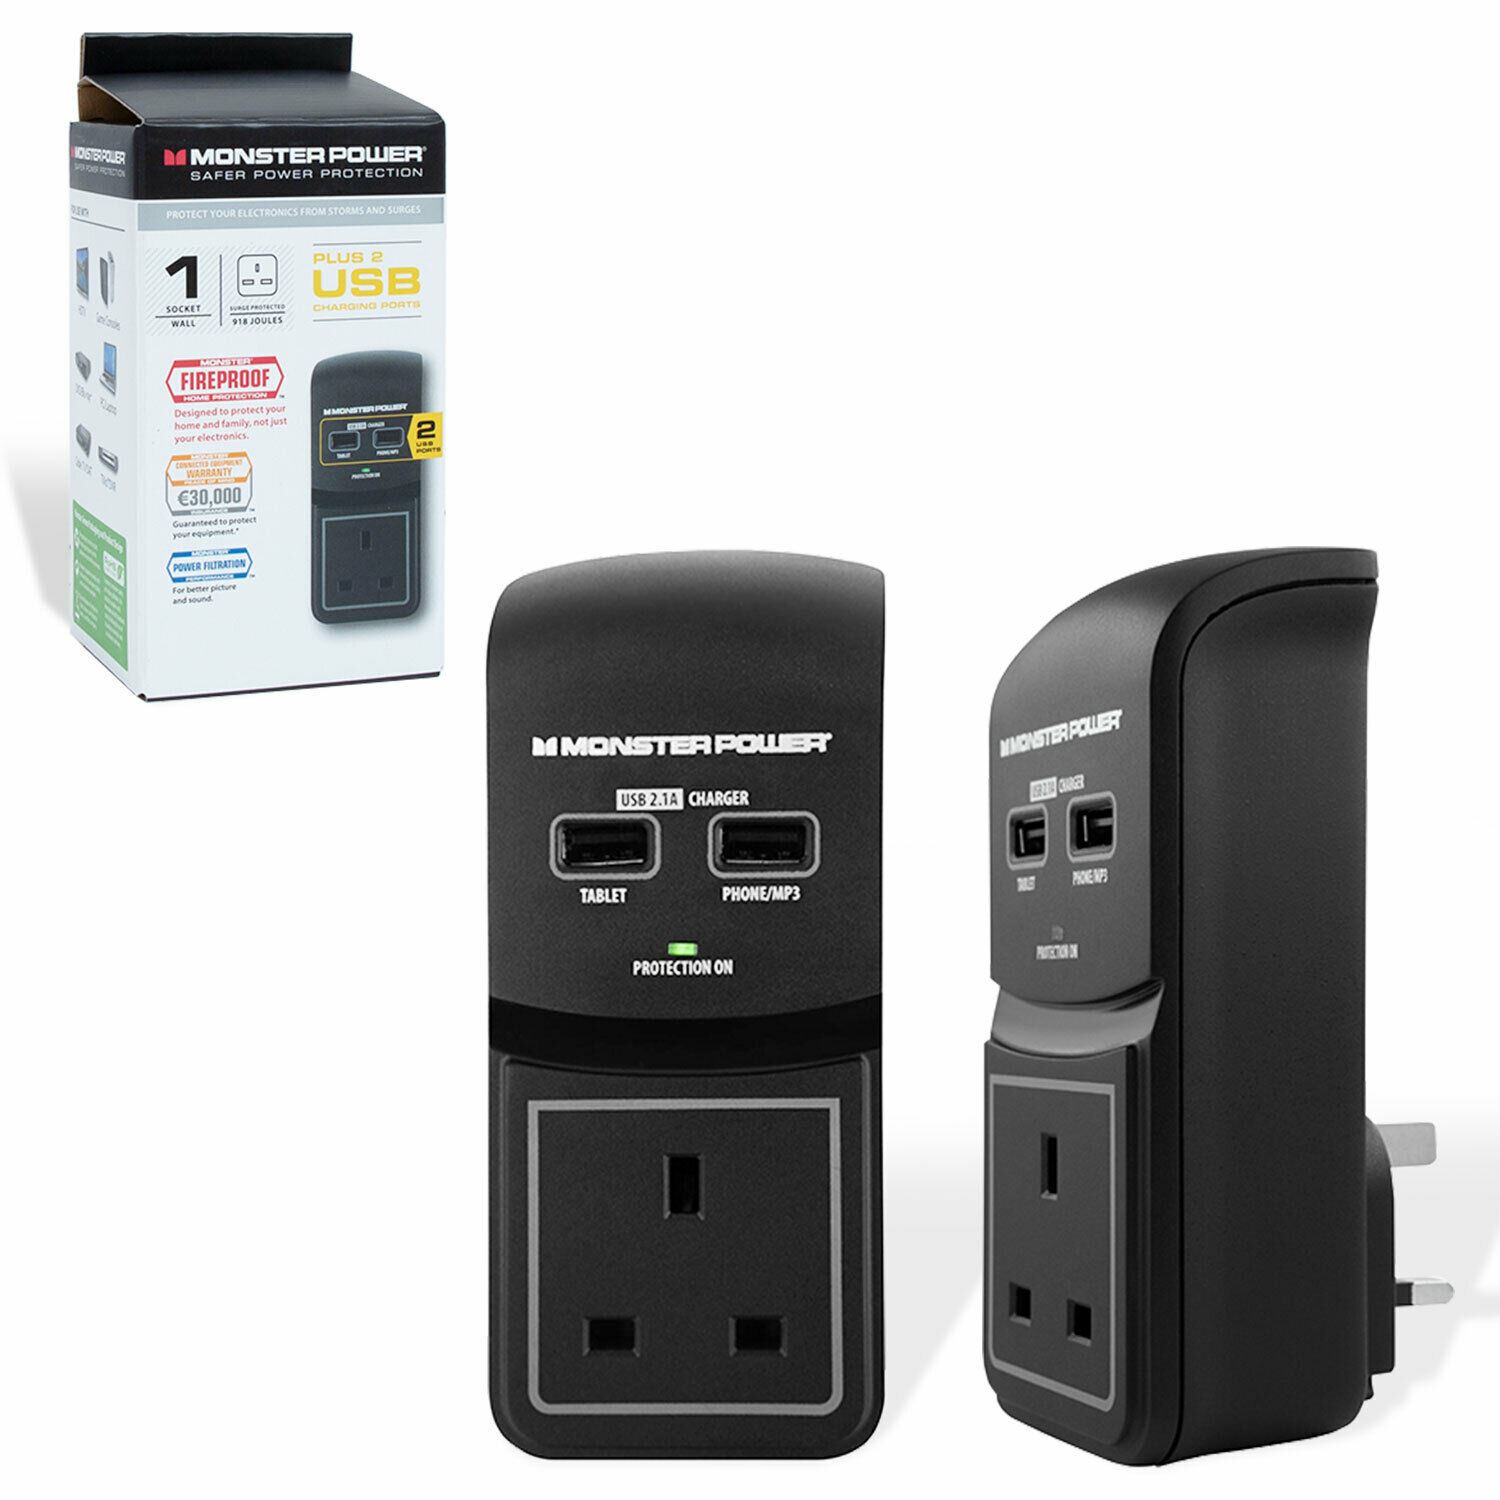 Monster Power Core 100 1 Port USB Surge Protected Socket